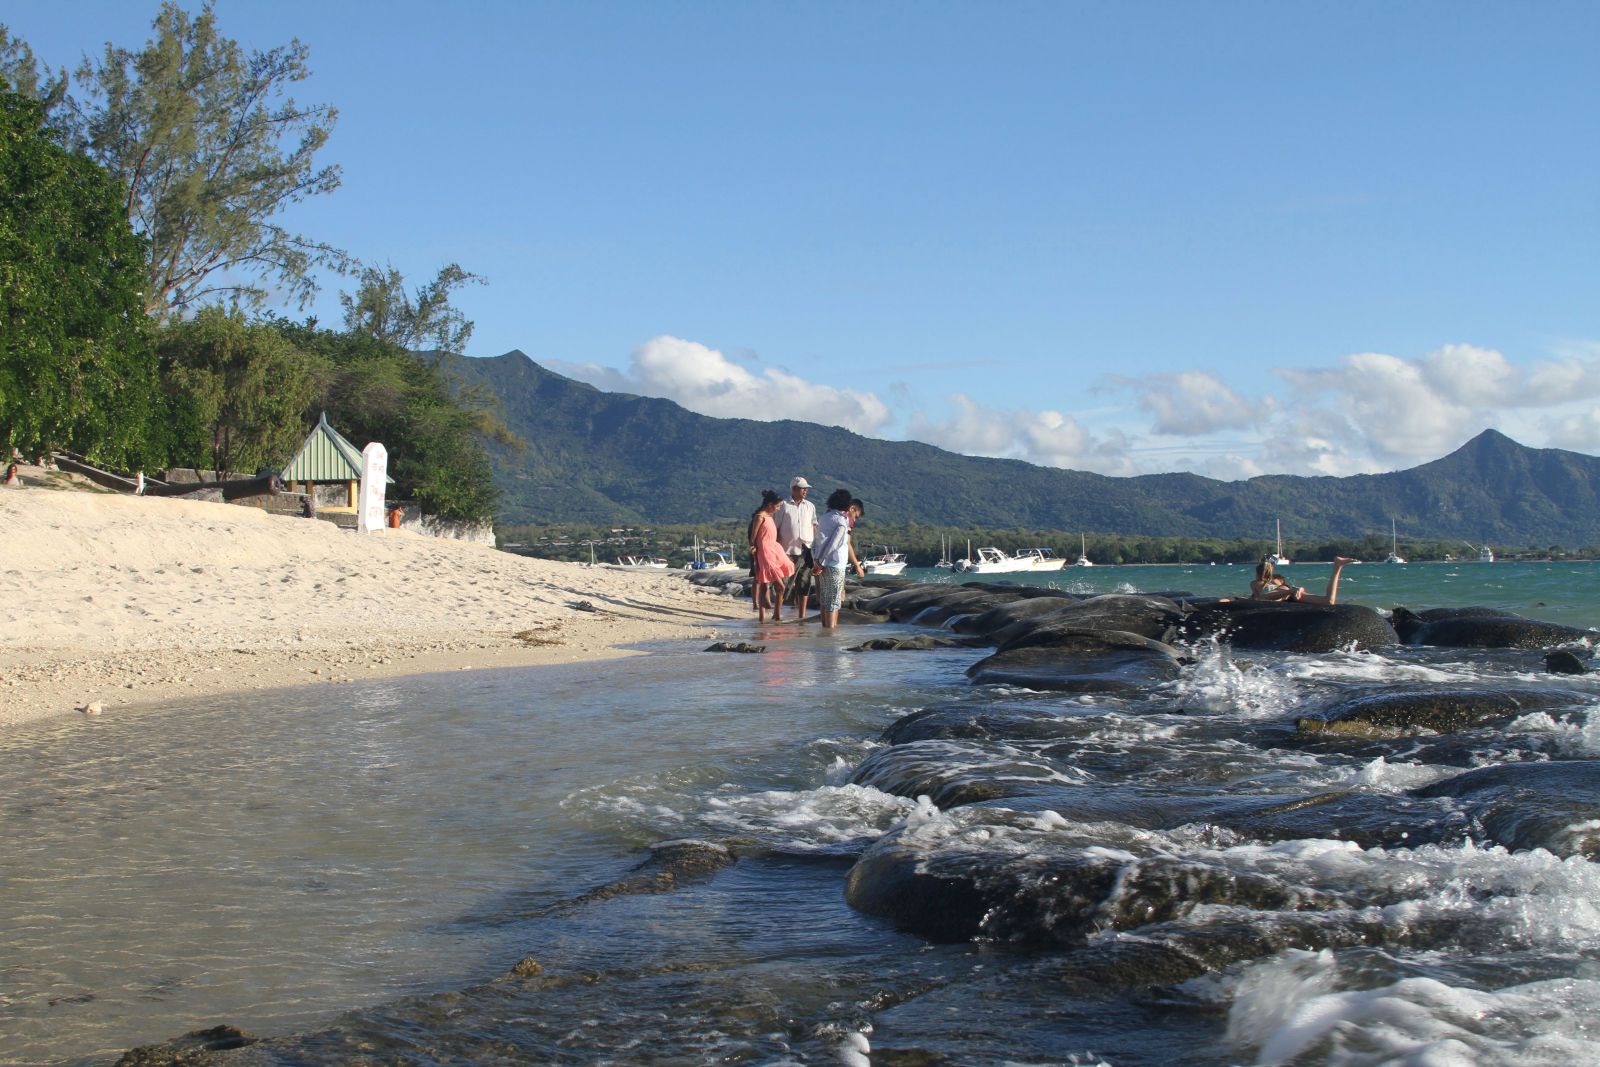 Mauritius is trying to fight beach erosion due to rising sea levels with sand bags.